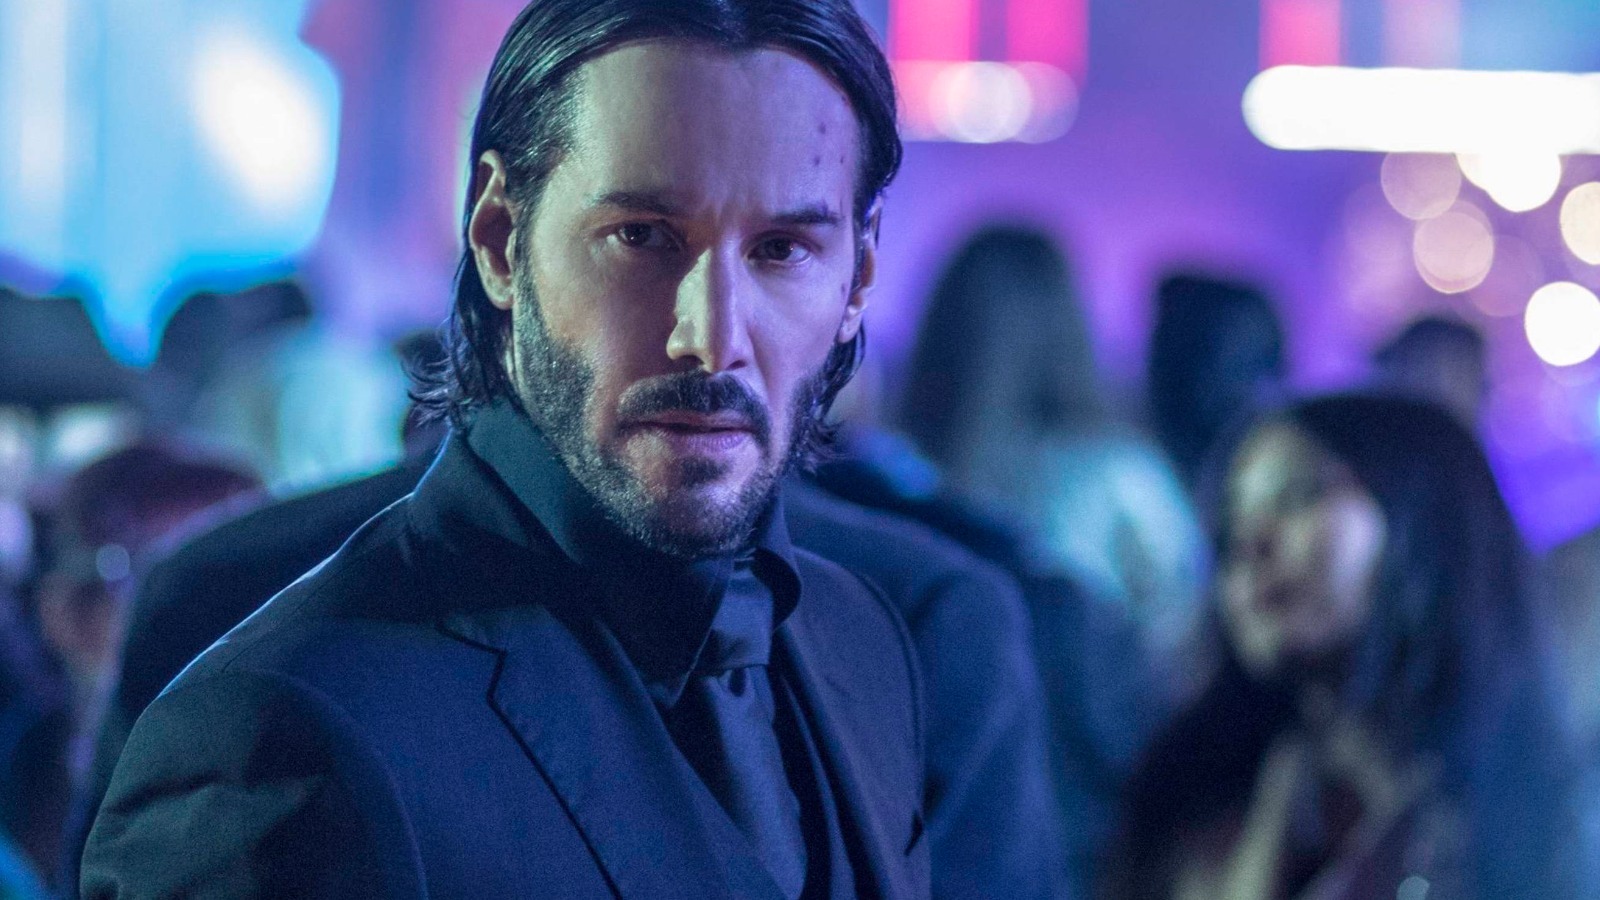 Devil In The White City franchise loses Keanu Reeves in today’s heartbreaking TV news